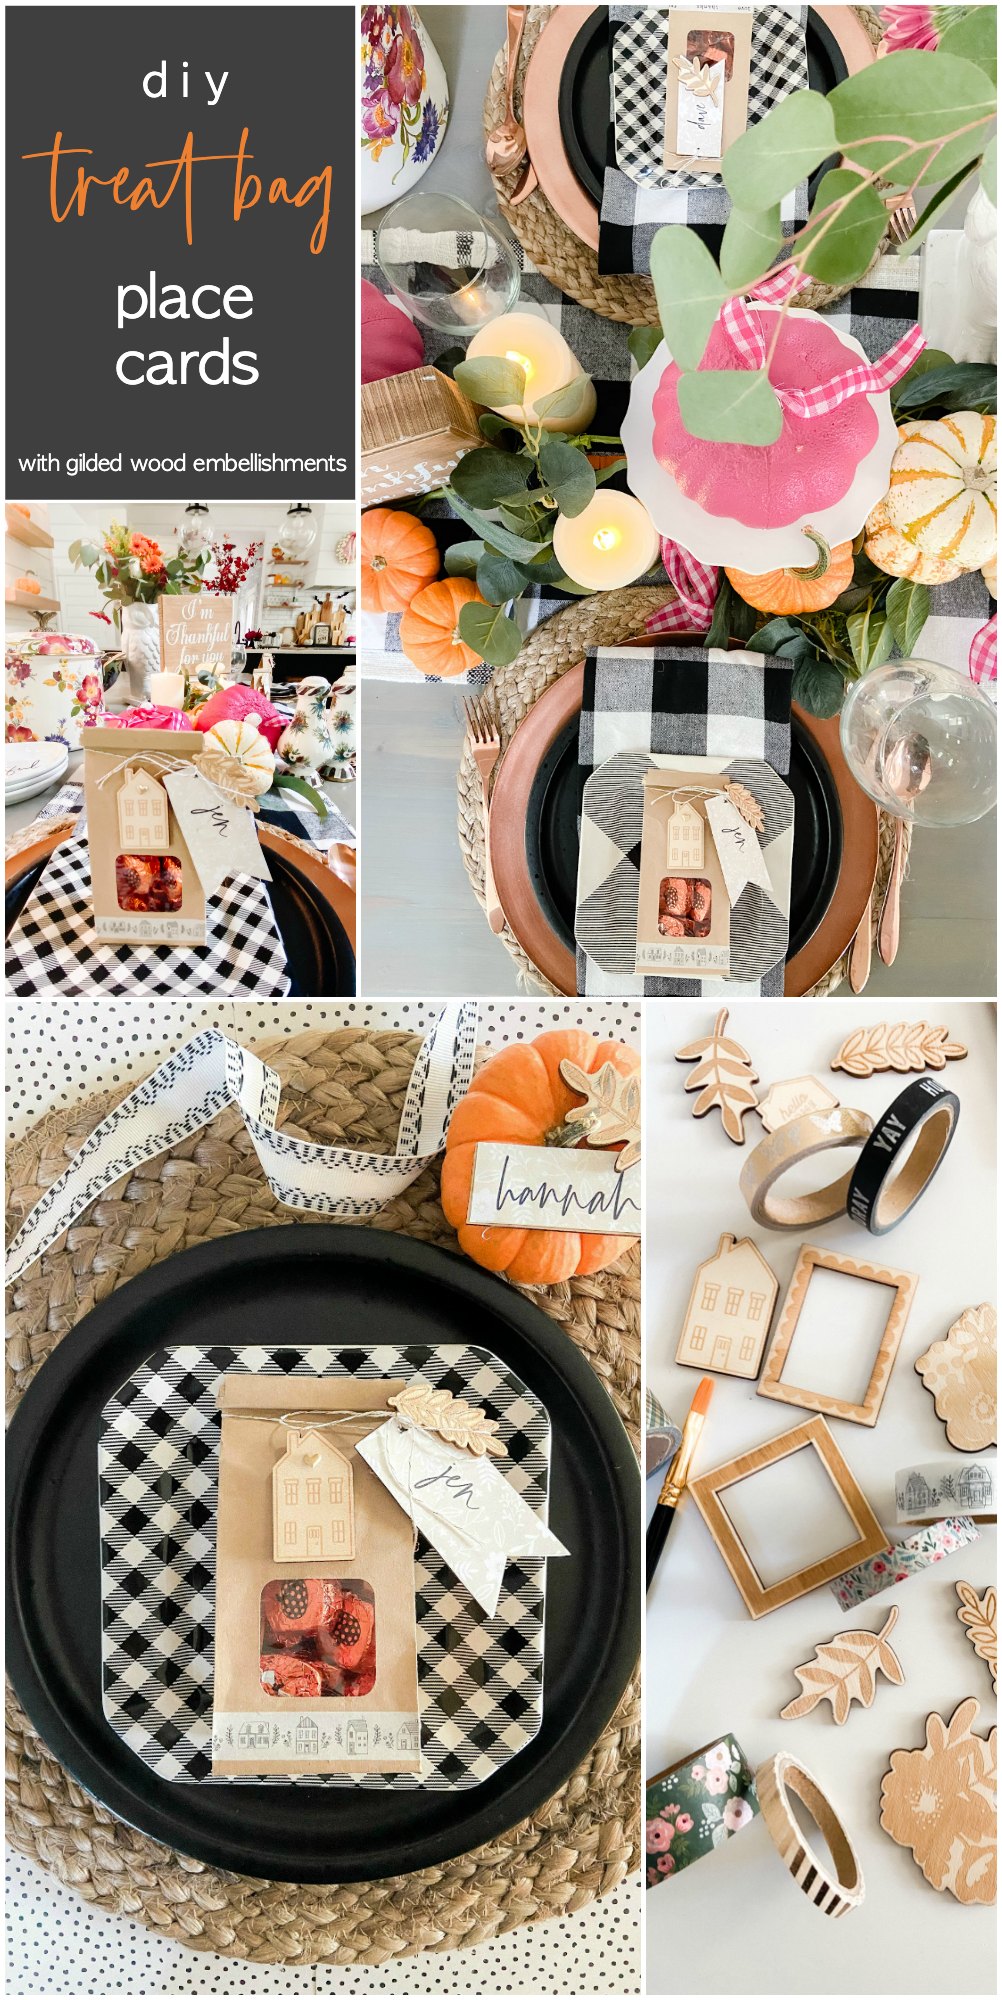 Thanksgiving Treat Bag Place Cards with Gilded Wood Embellishments. Create place cards treat bags for your fall dinners. Guests will know where to sit AND have some special treats to take home after dinner!